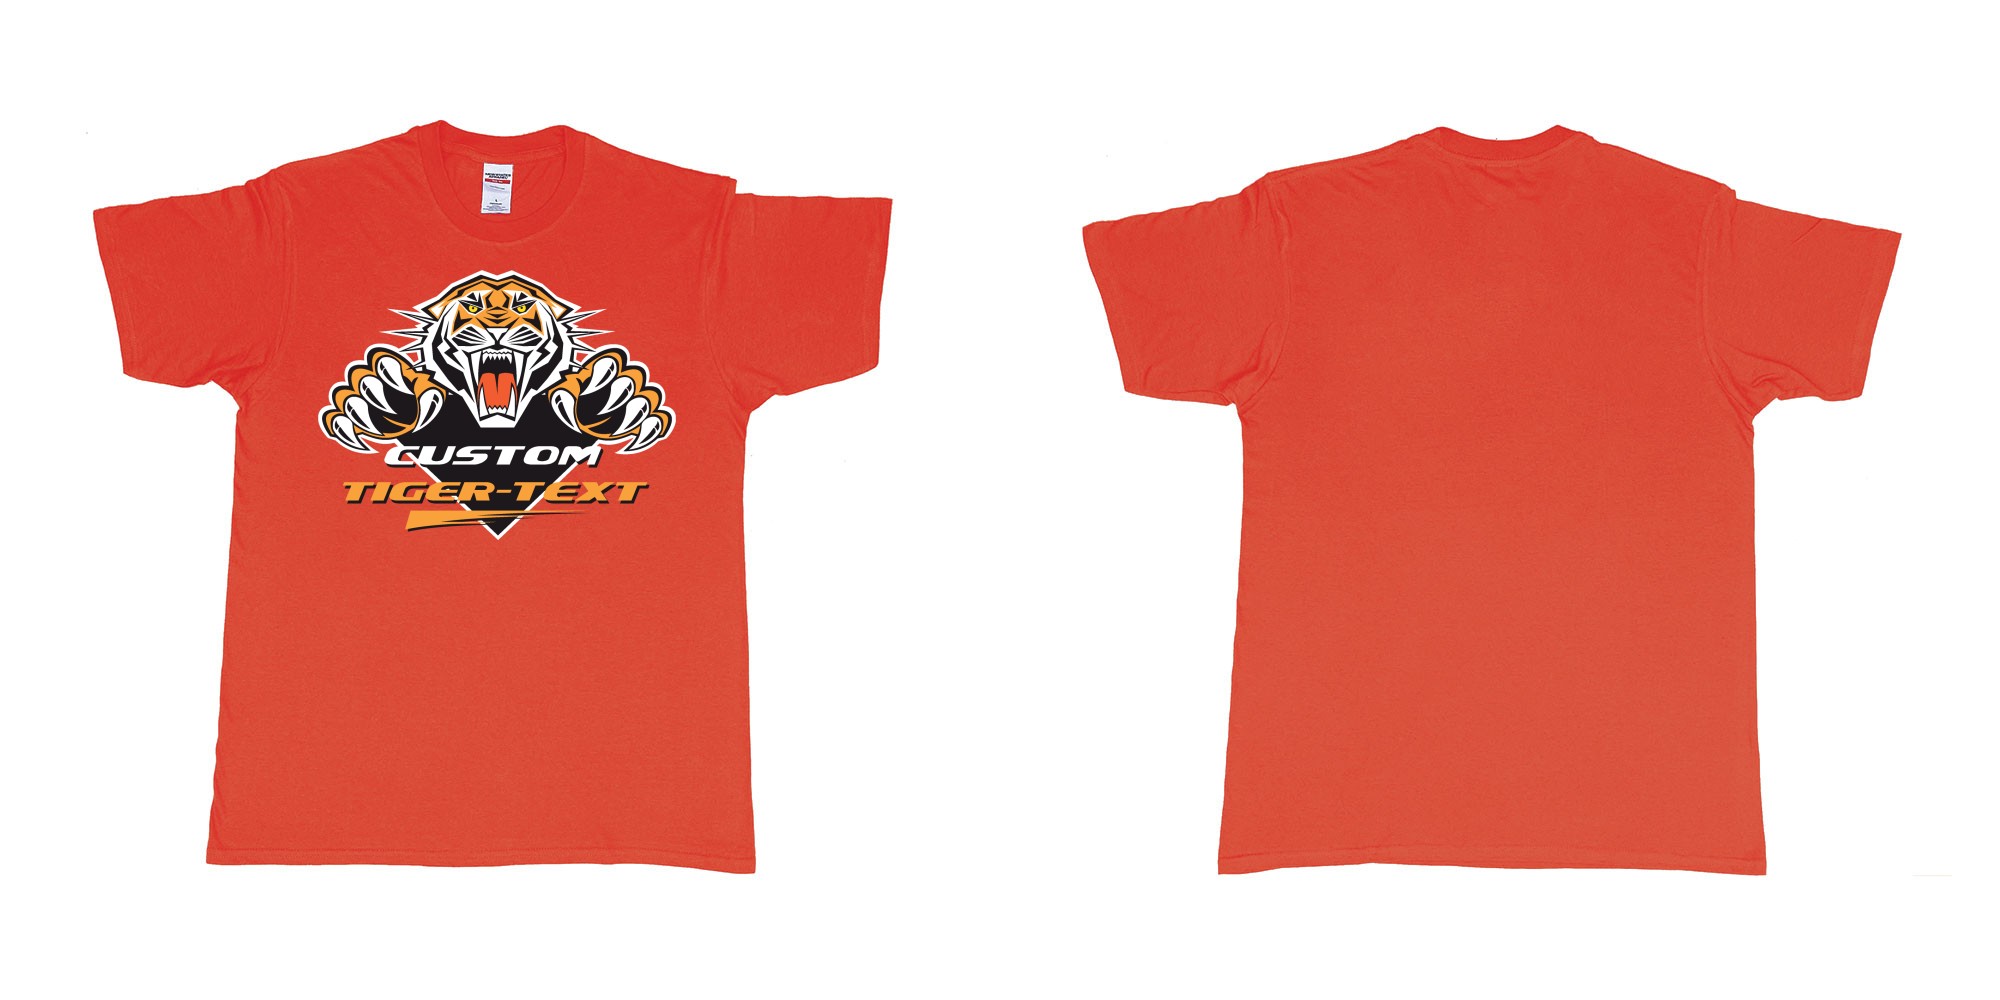 Custom tshirt design the wests tigers sydney national rugby league custom tshirt print in fabric color red choice your own text made in Bali by The Pirate Way